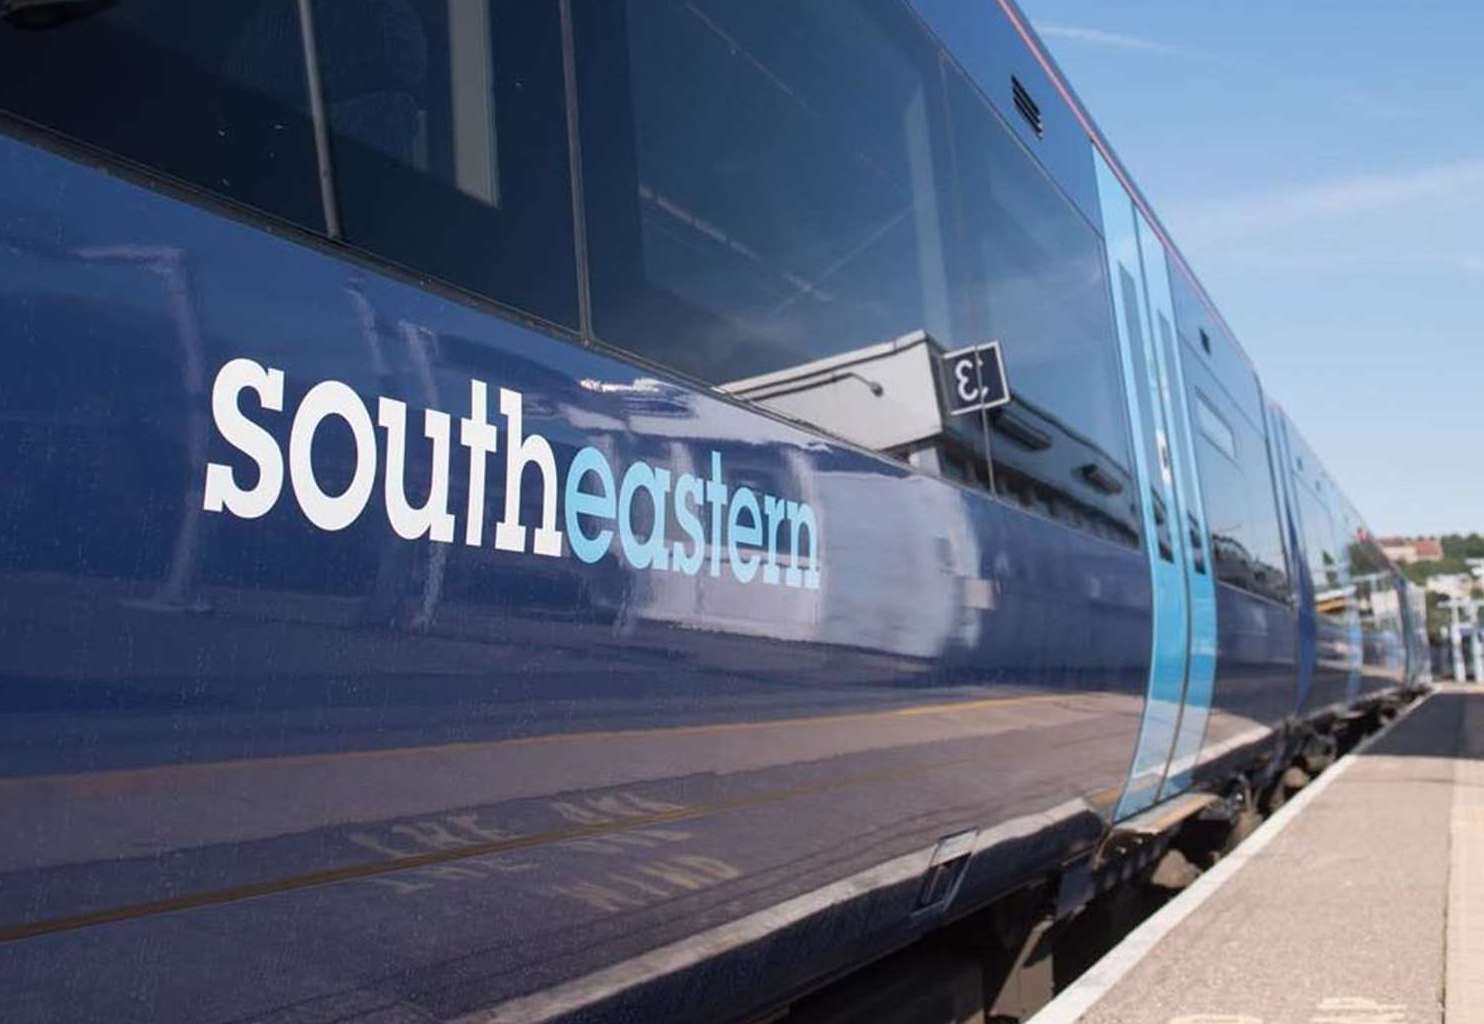 Trains are unable to run between Maidstone East and Ashford